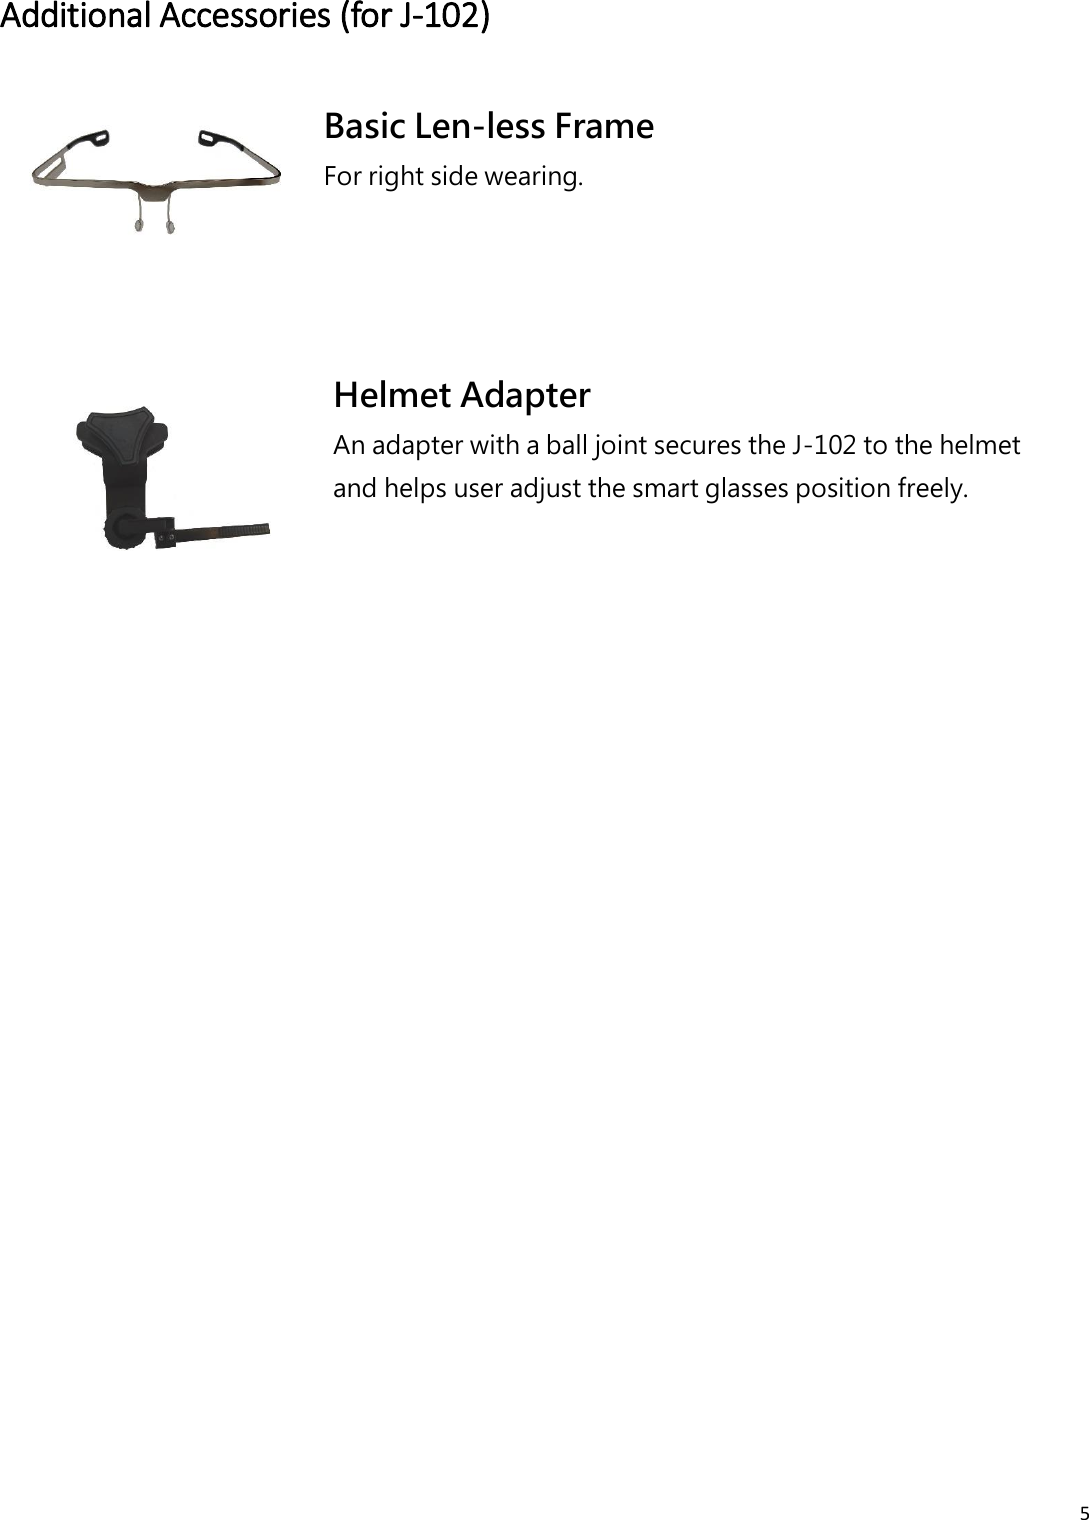 5  Additional Accessories (for J-102)  Basic Len-less Frame For right side wearing.  Helmet Adapter An adapter with a ball joint secures the J-102 to the helmet and helps user adjust the smart glasses position freely.    